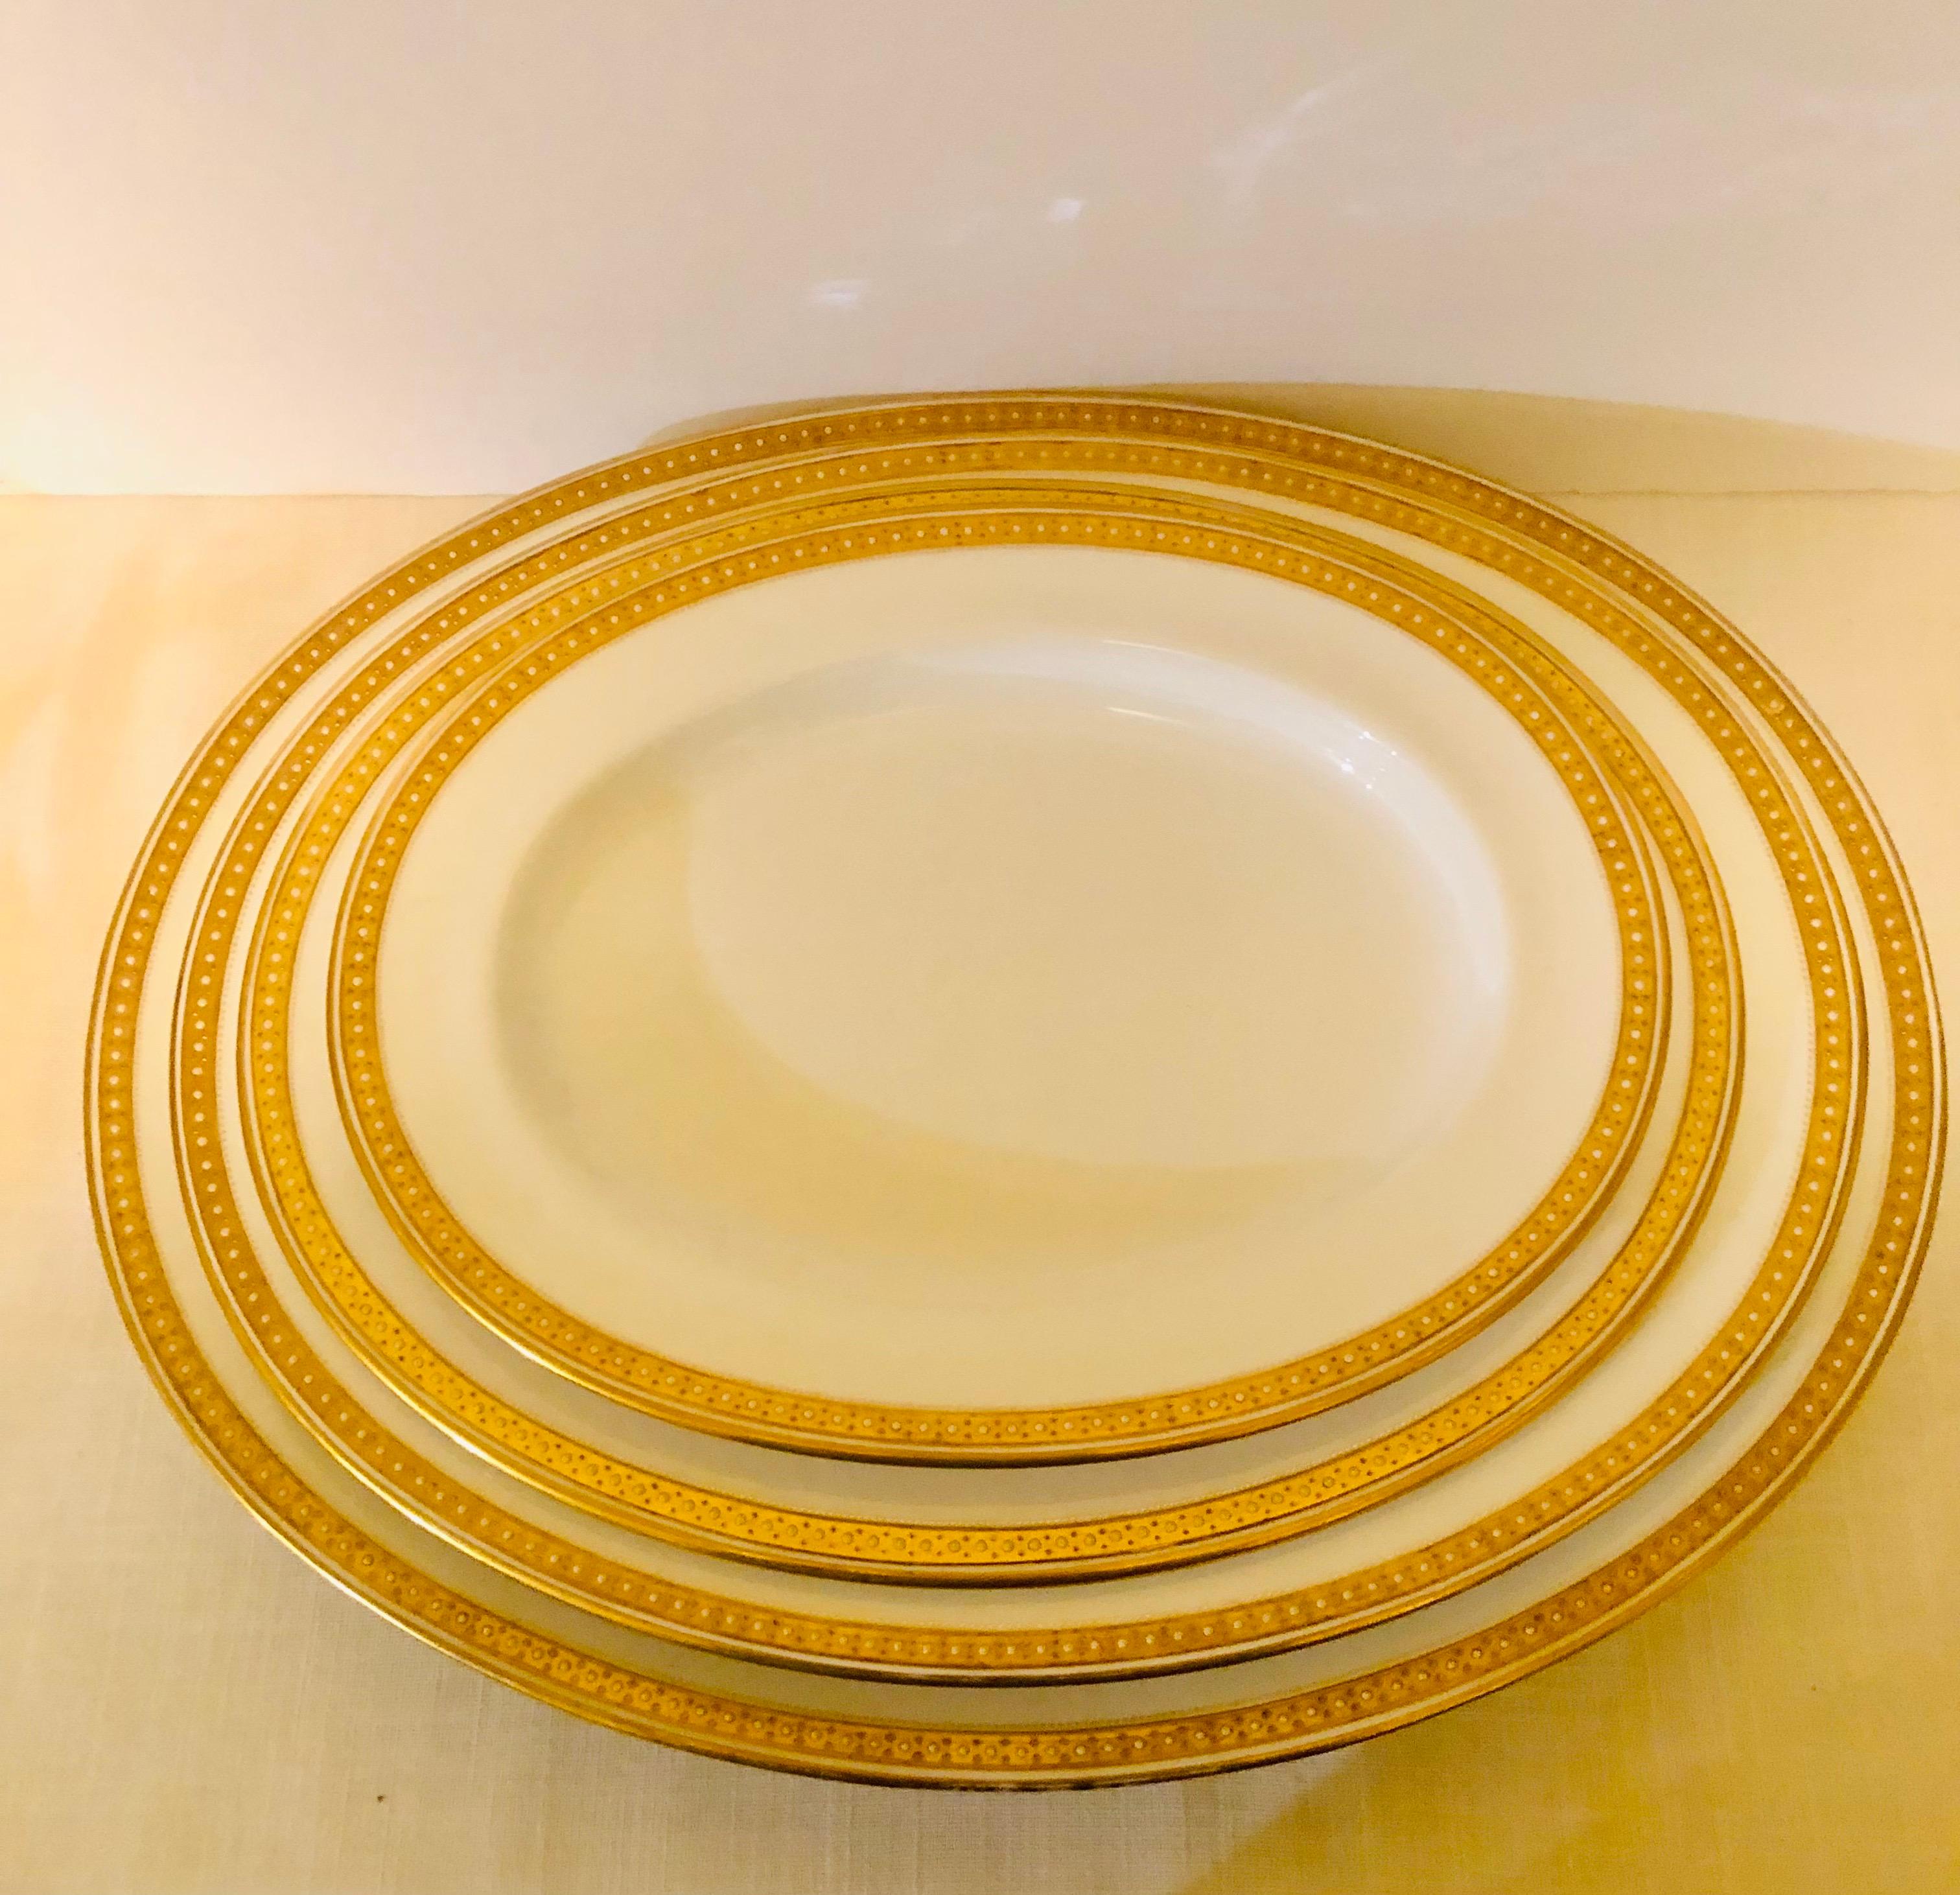 Early 20th Century Nest of Four Spode Copeland Serving Platters With Gold Border and White Jeweling